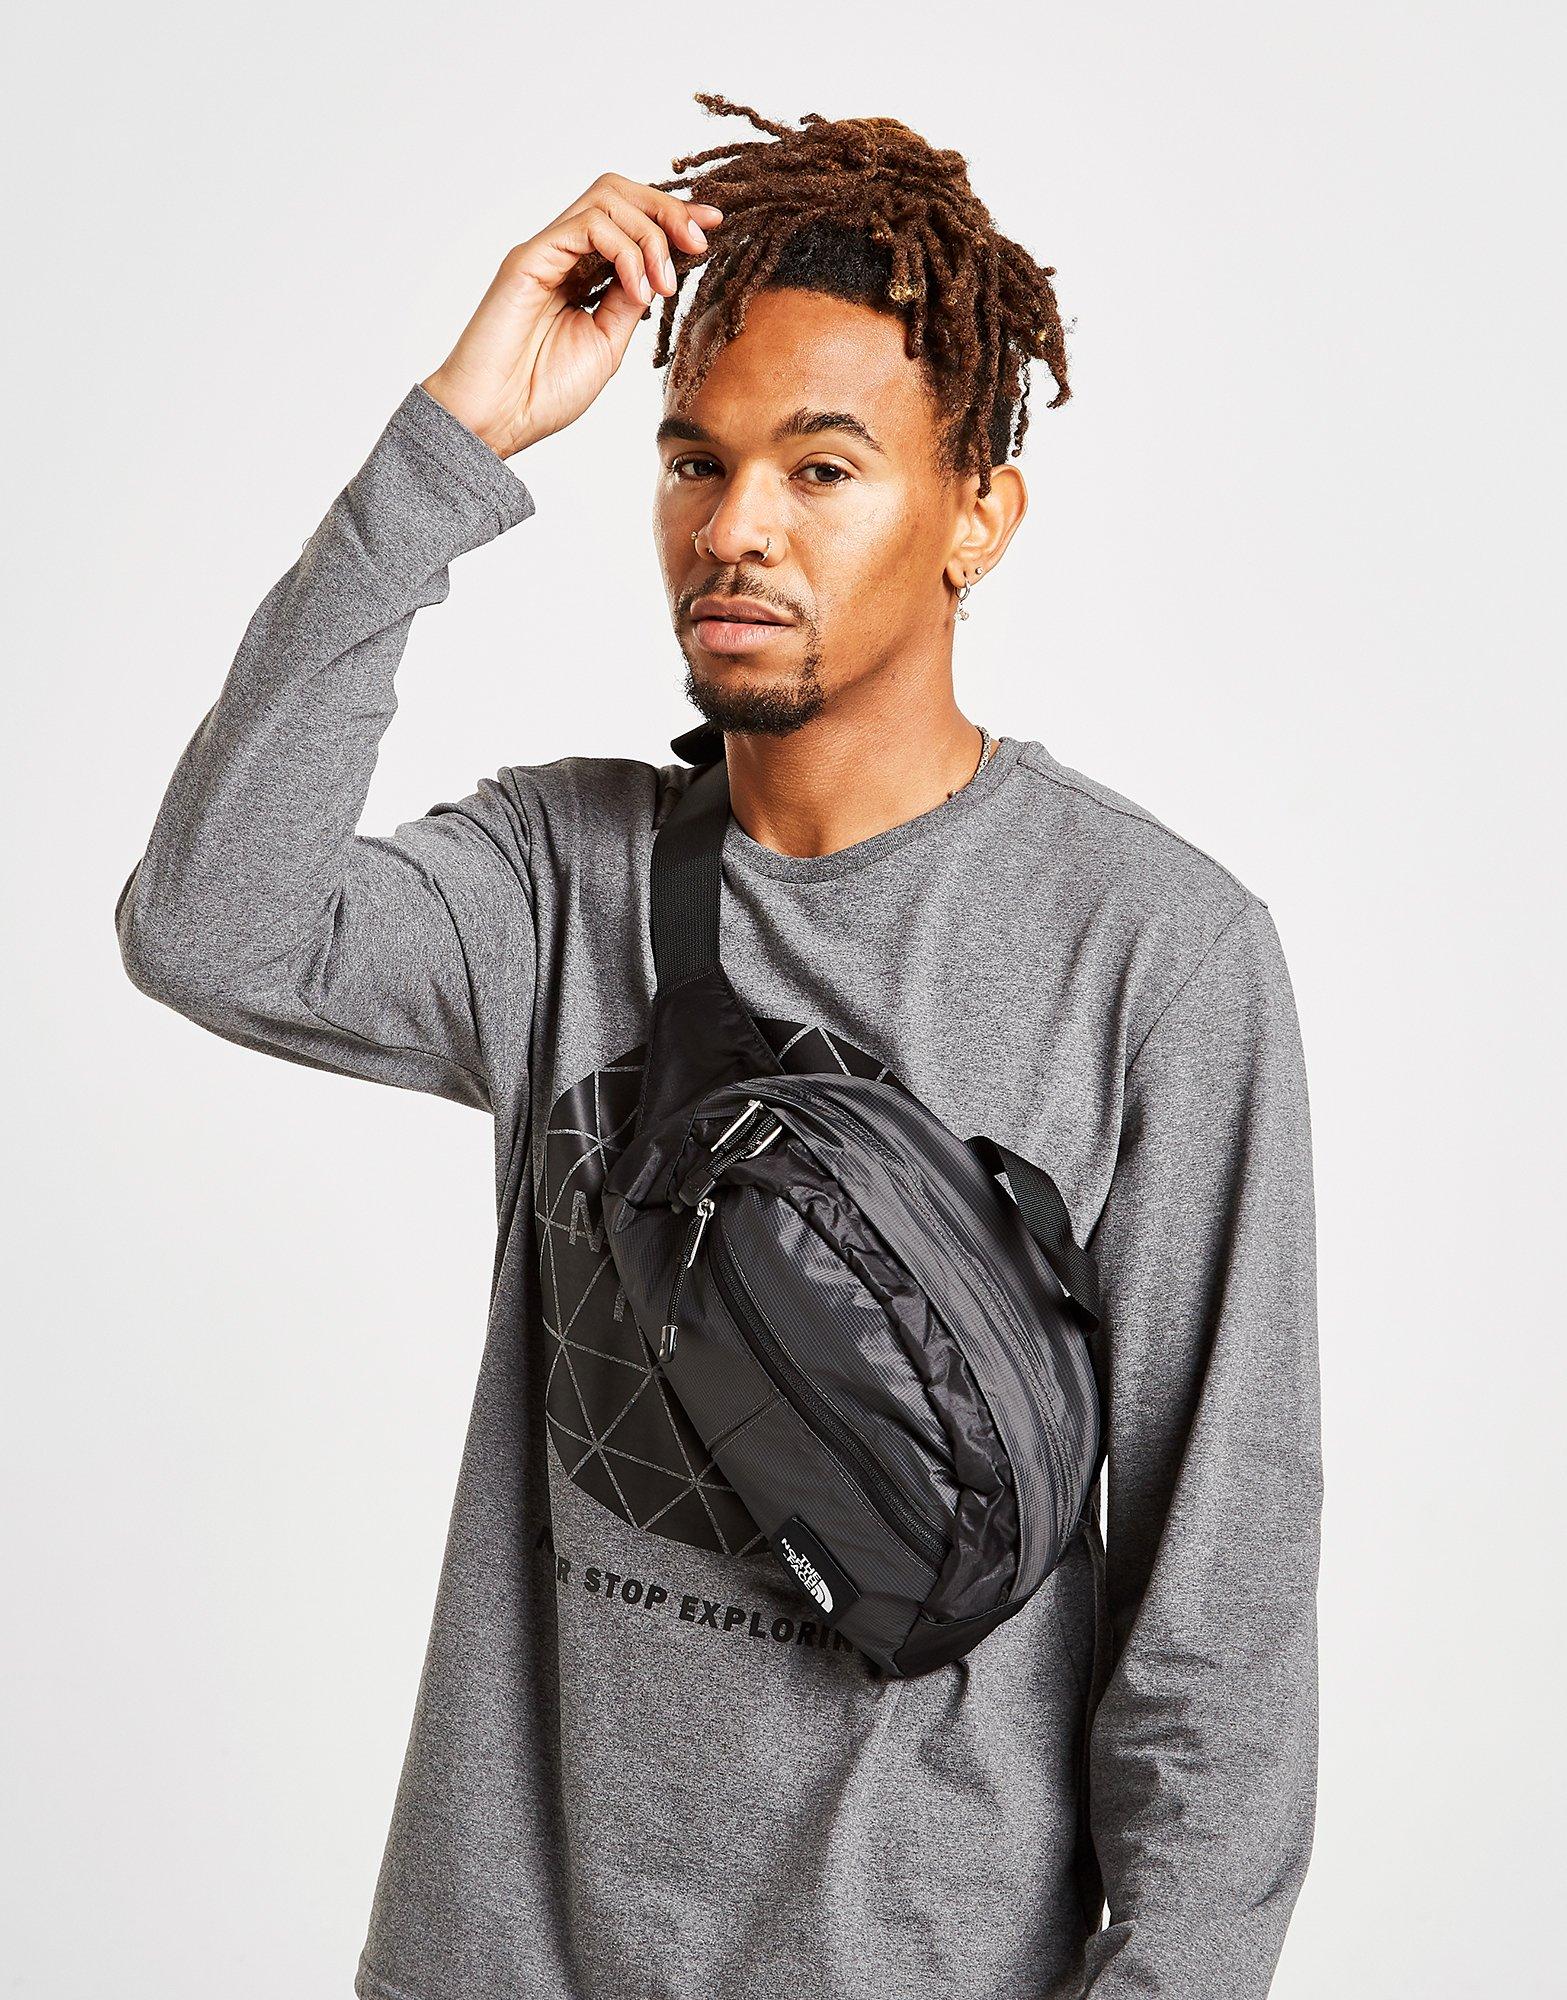 north face roo 2